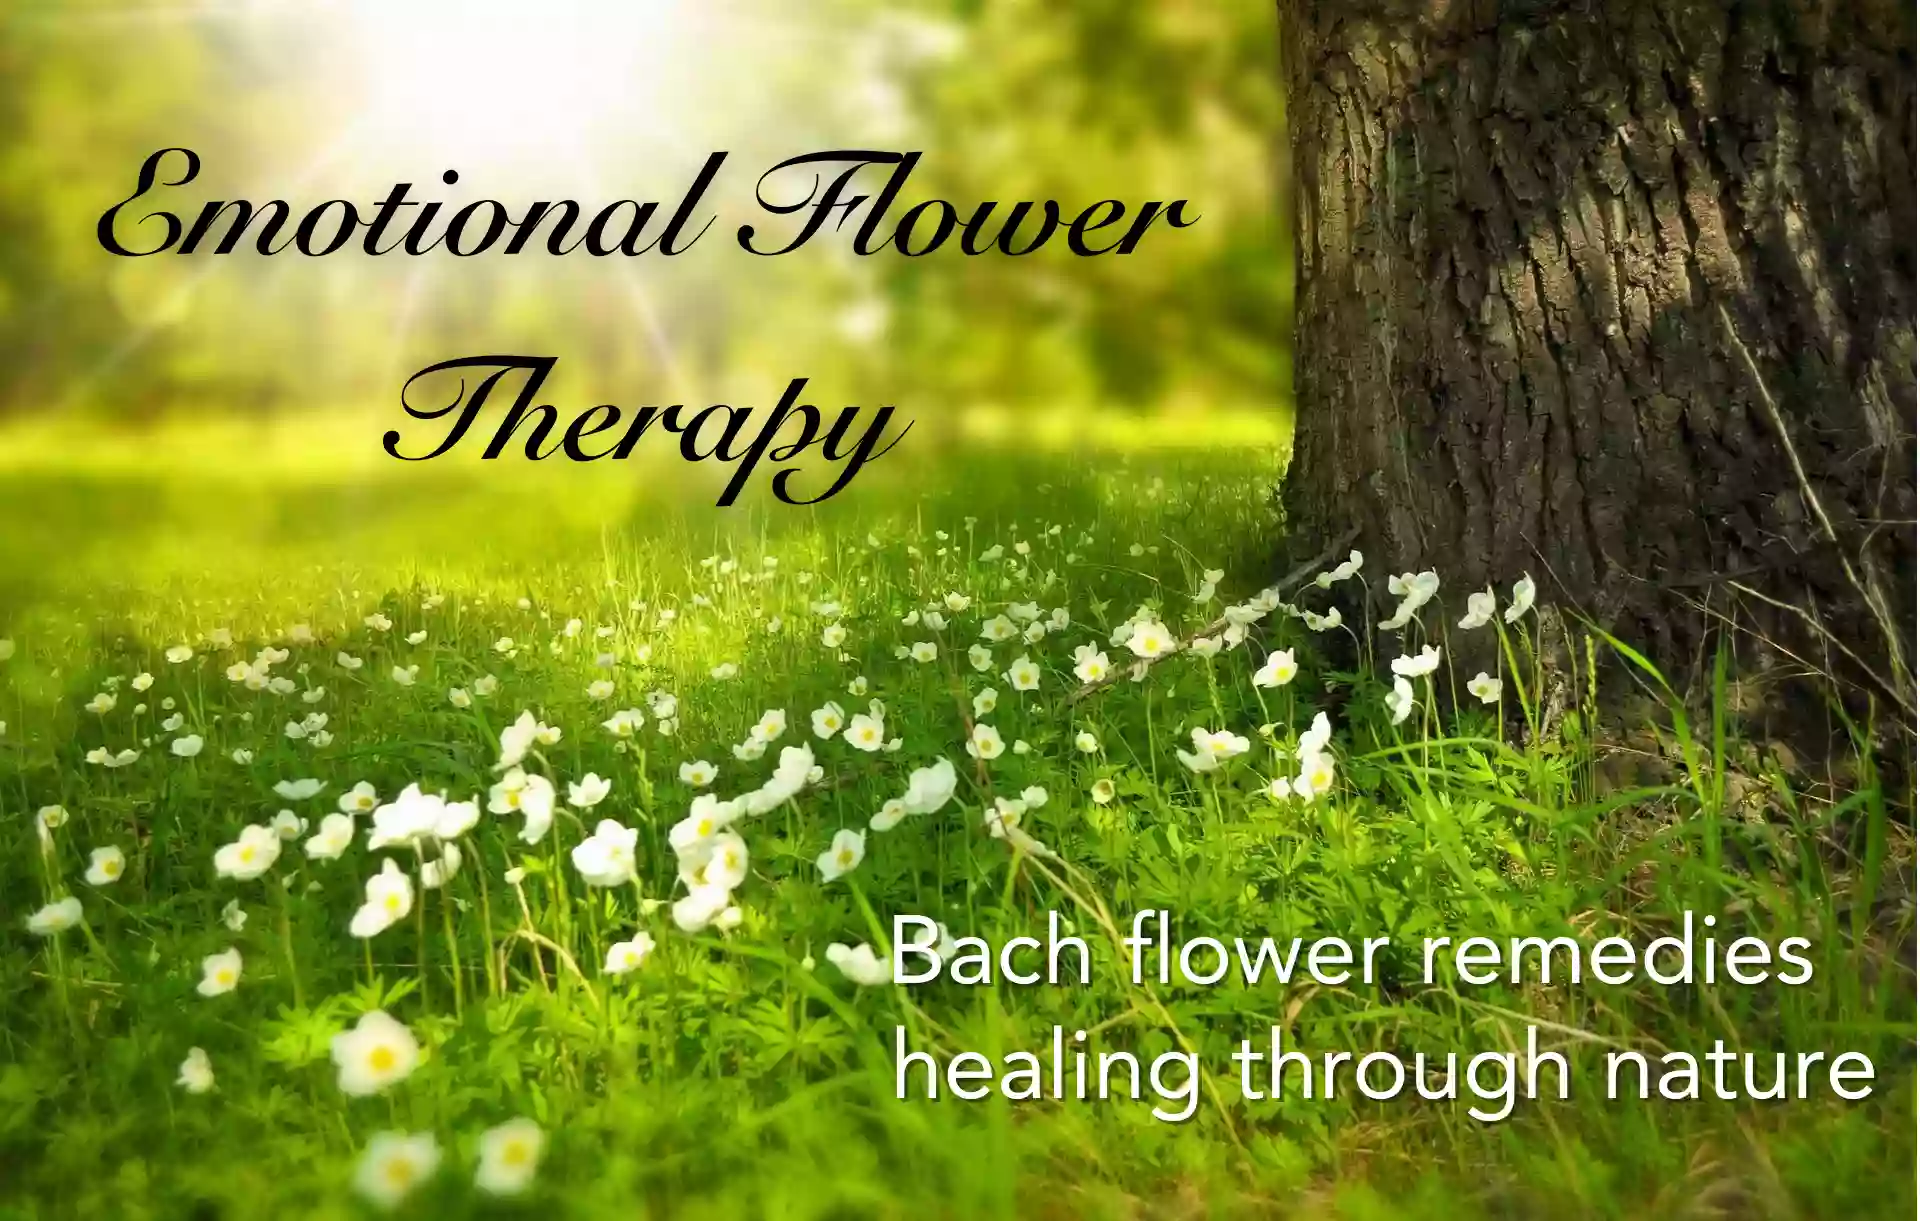 Emotional Flower Therapy